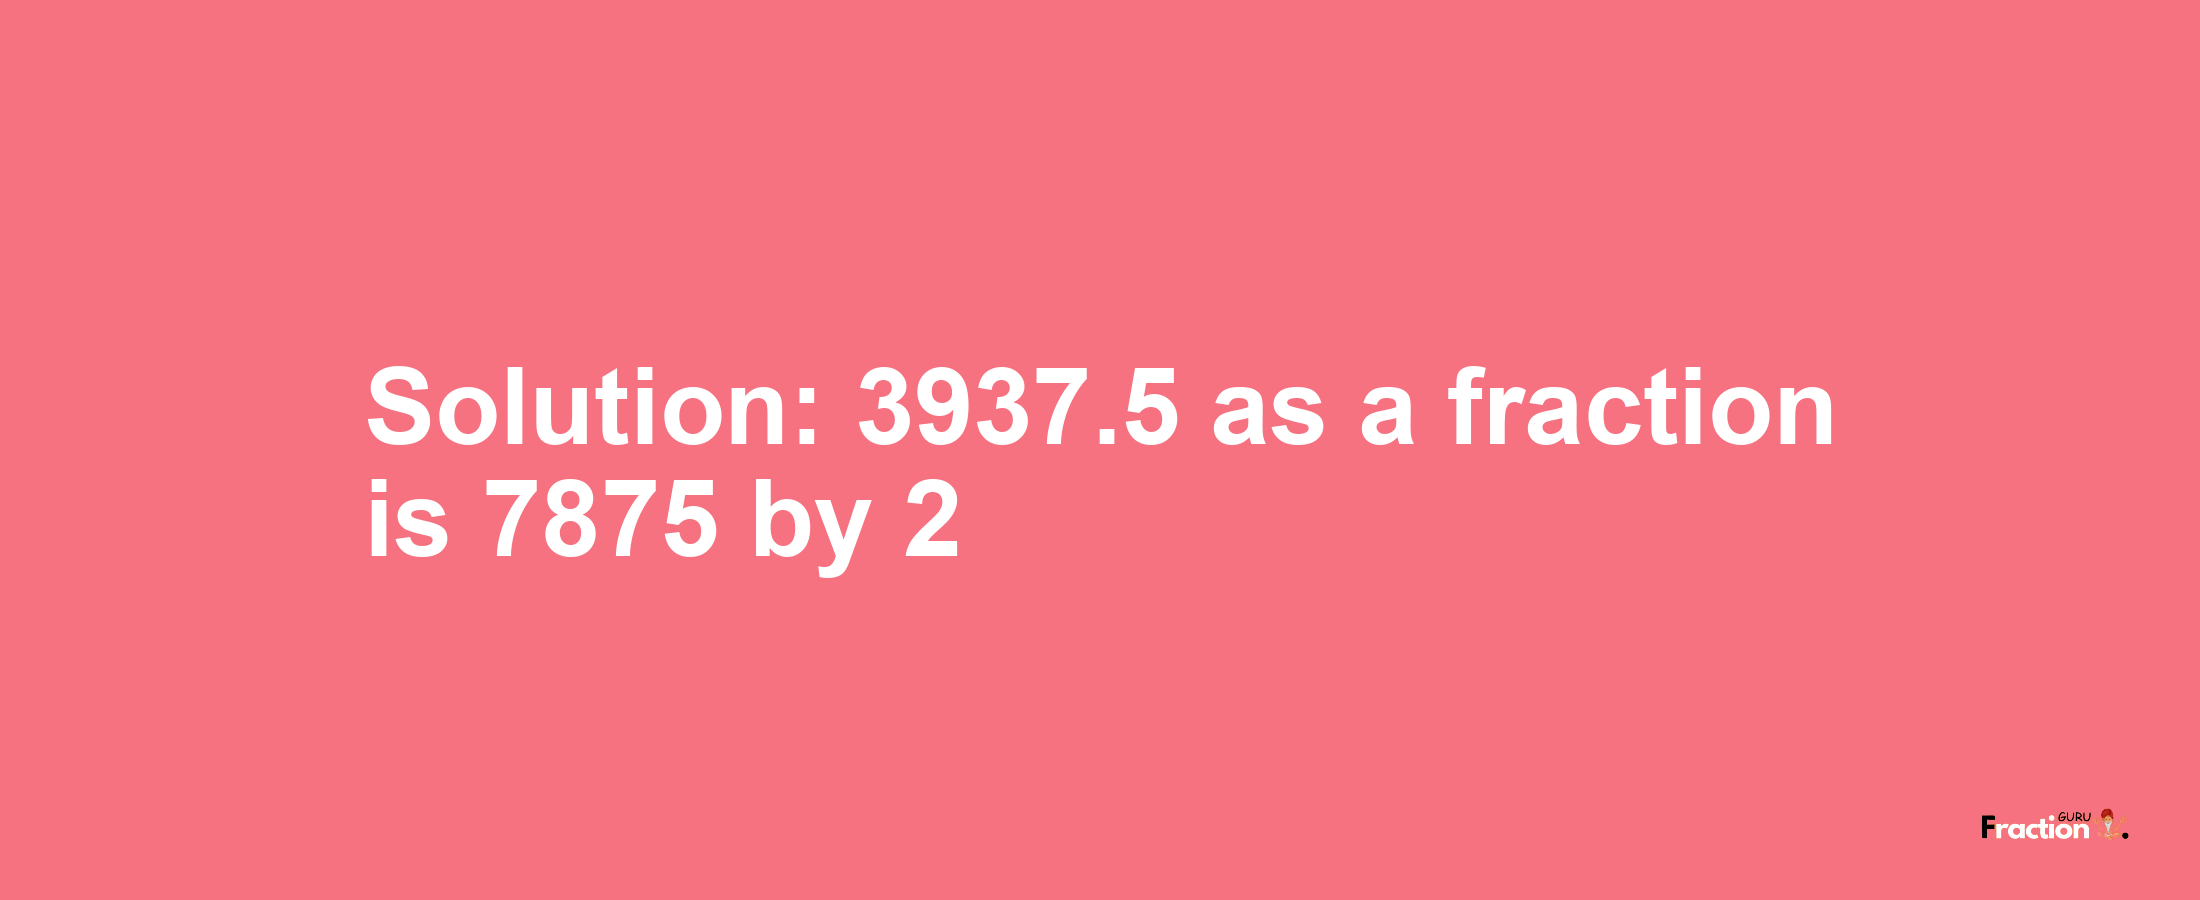 Solution:3937.5 as a fraction is 7875/2